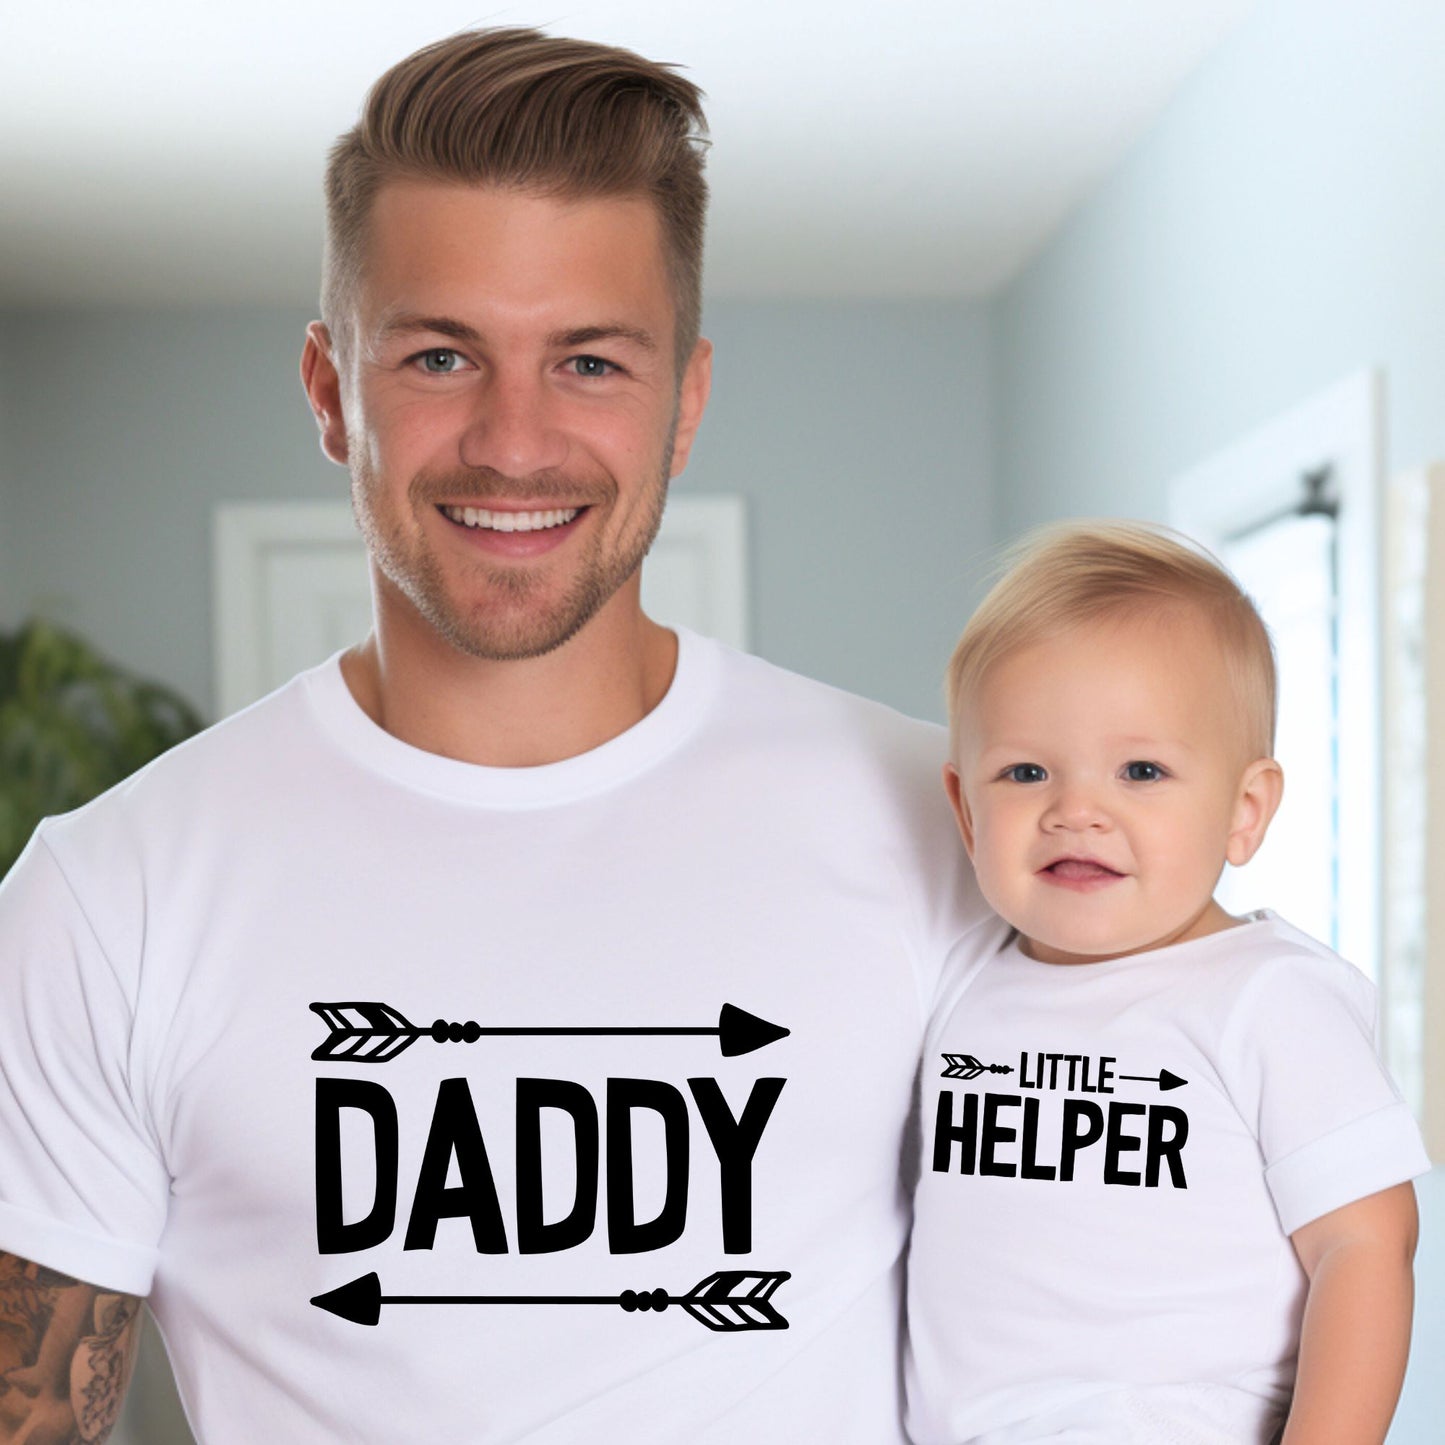 Daddy & Little Helper - Dad & Baby Matching Outfits